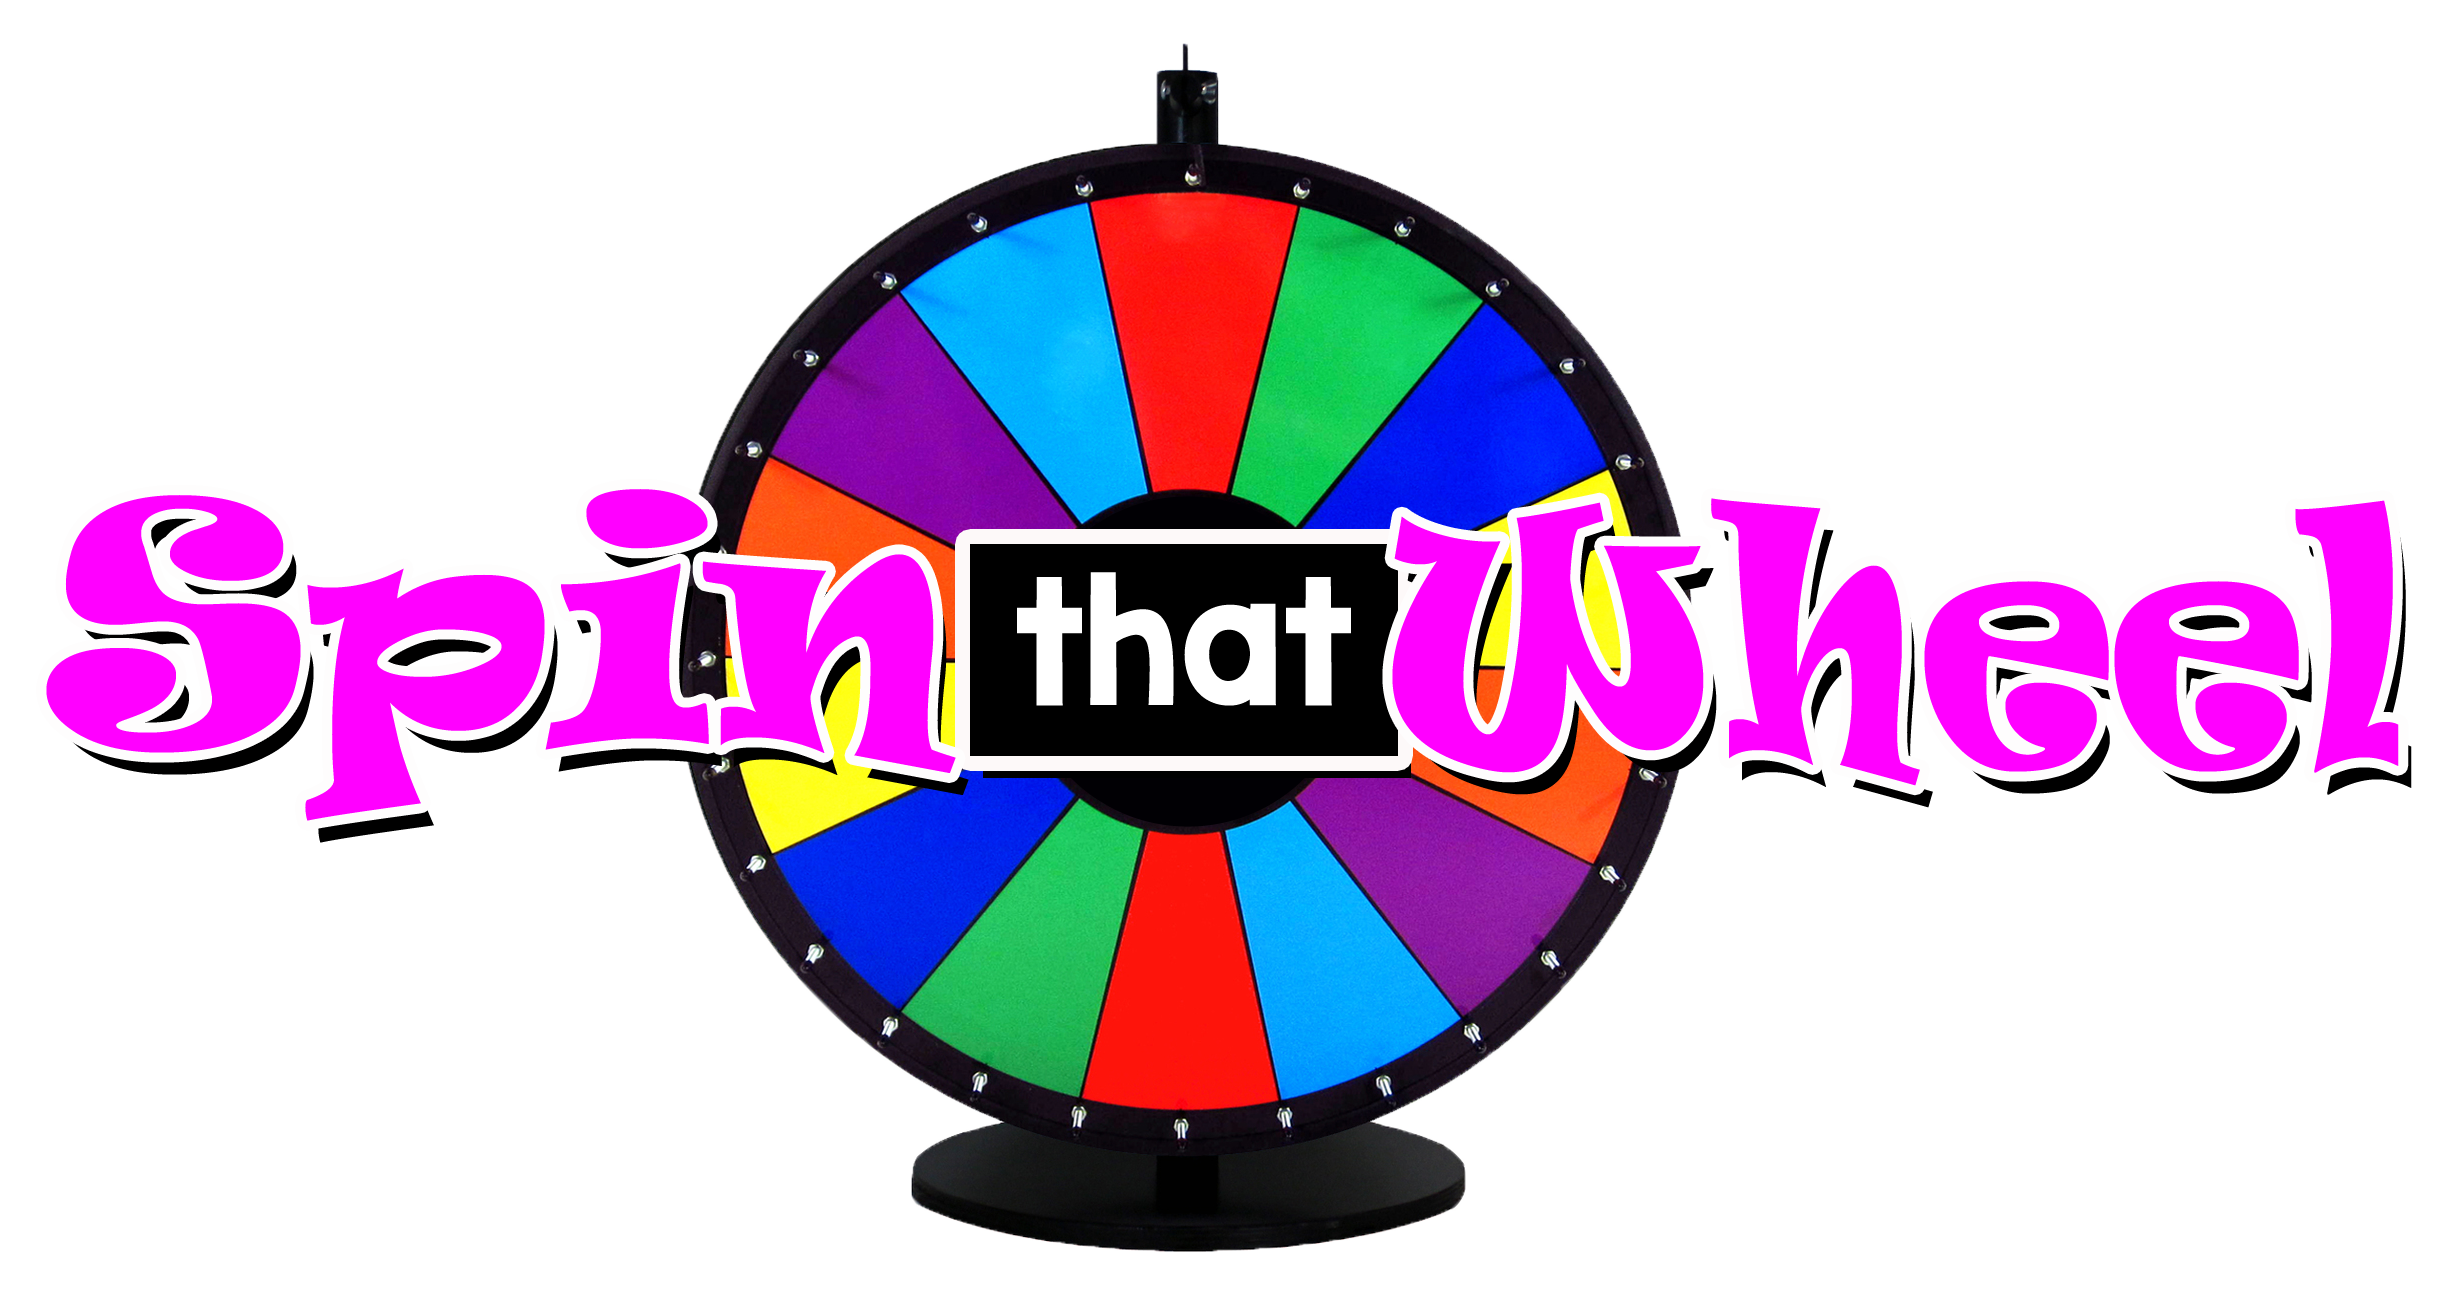 Spin and win real prizes free online